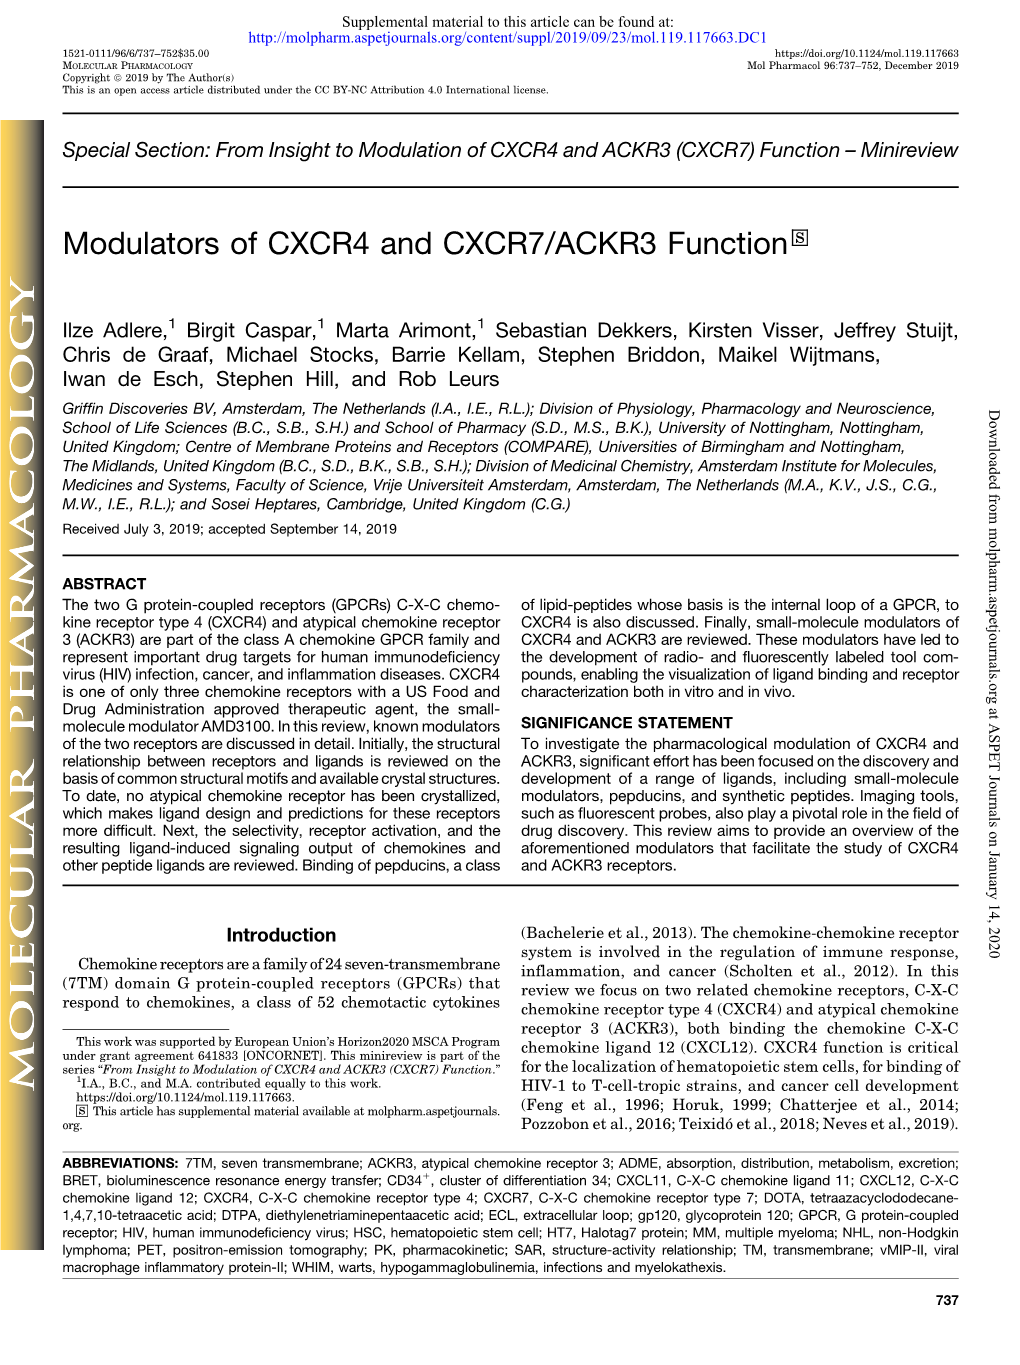 Modulators of CXCR4 and CXCR7/ACKR3 Function S